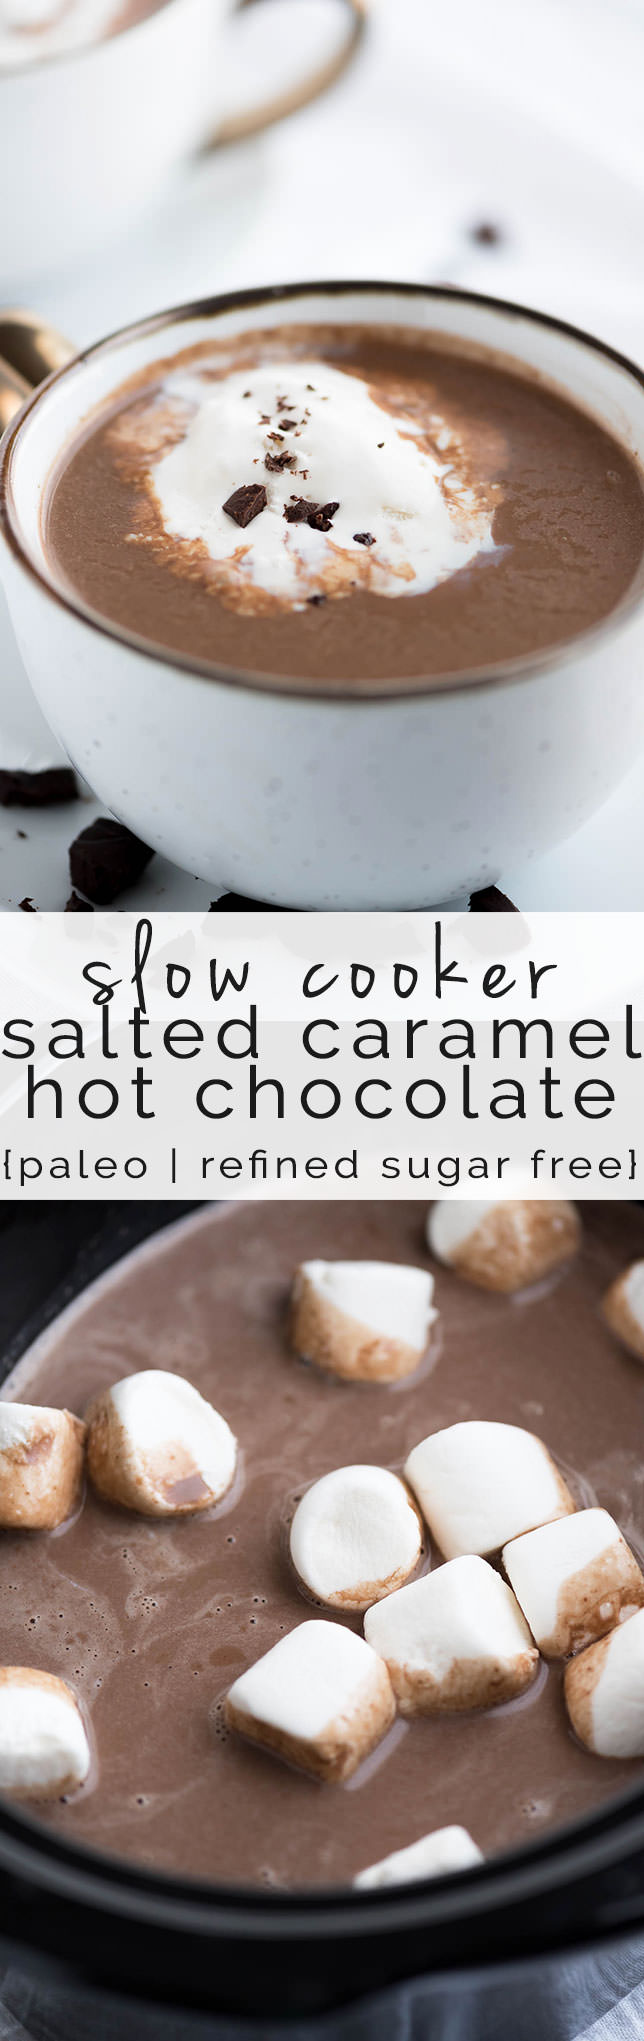 slow cooker hot chocolate recipe, crock pots, easy, spiked, best, healthy, alcohol, vegan, Christmas, dairy free, cocoa, baileys, parties, families, holidays, whipped cream, friends, simple, how to make, refined sugar free